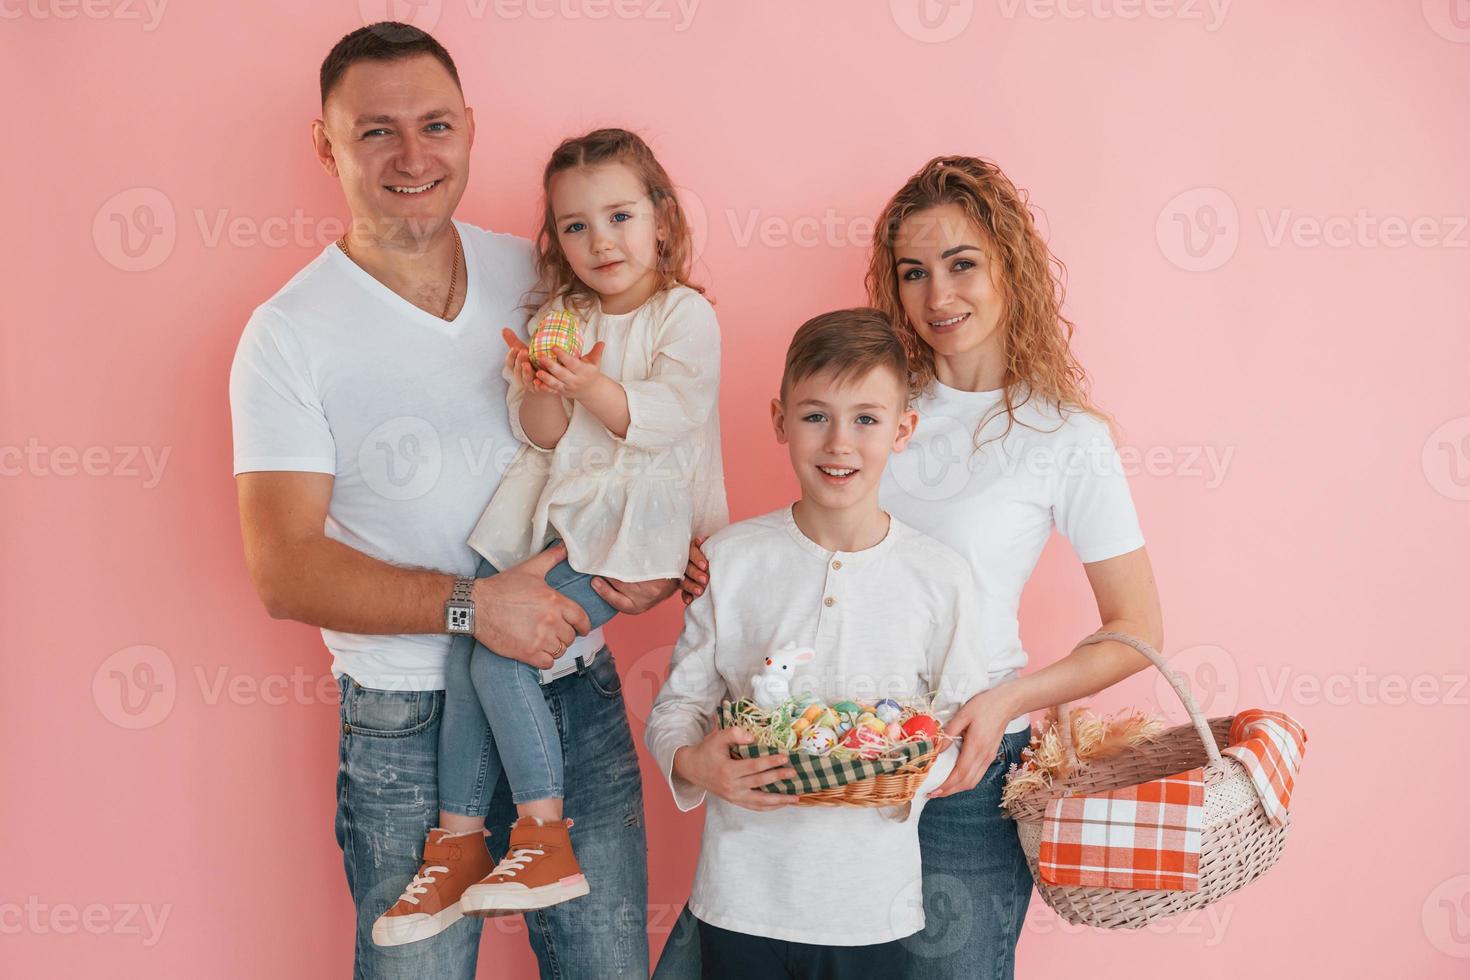 Standing against pink background. Happy family celebrating Easter holidays together photo